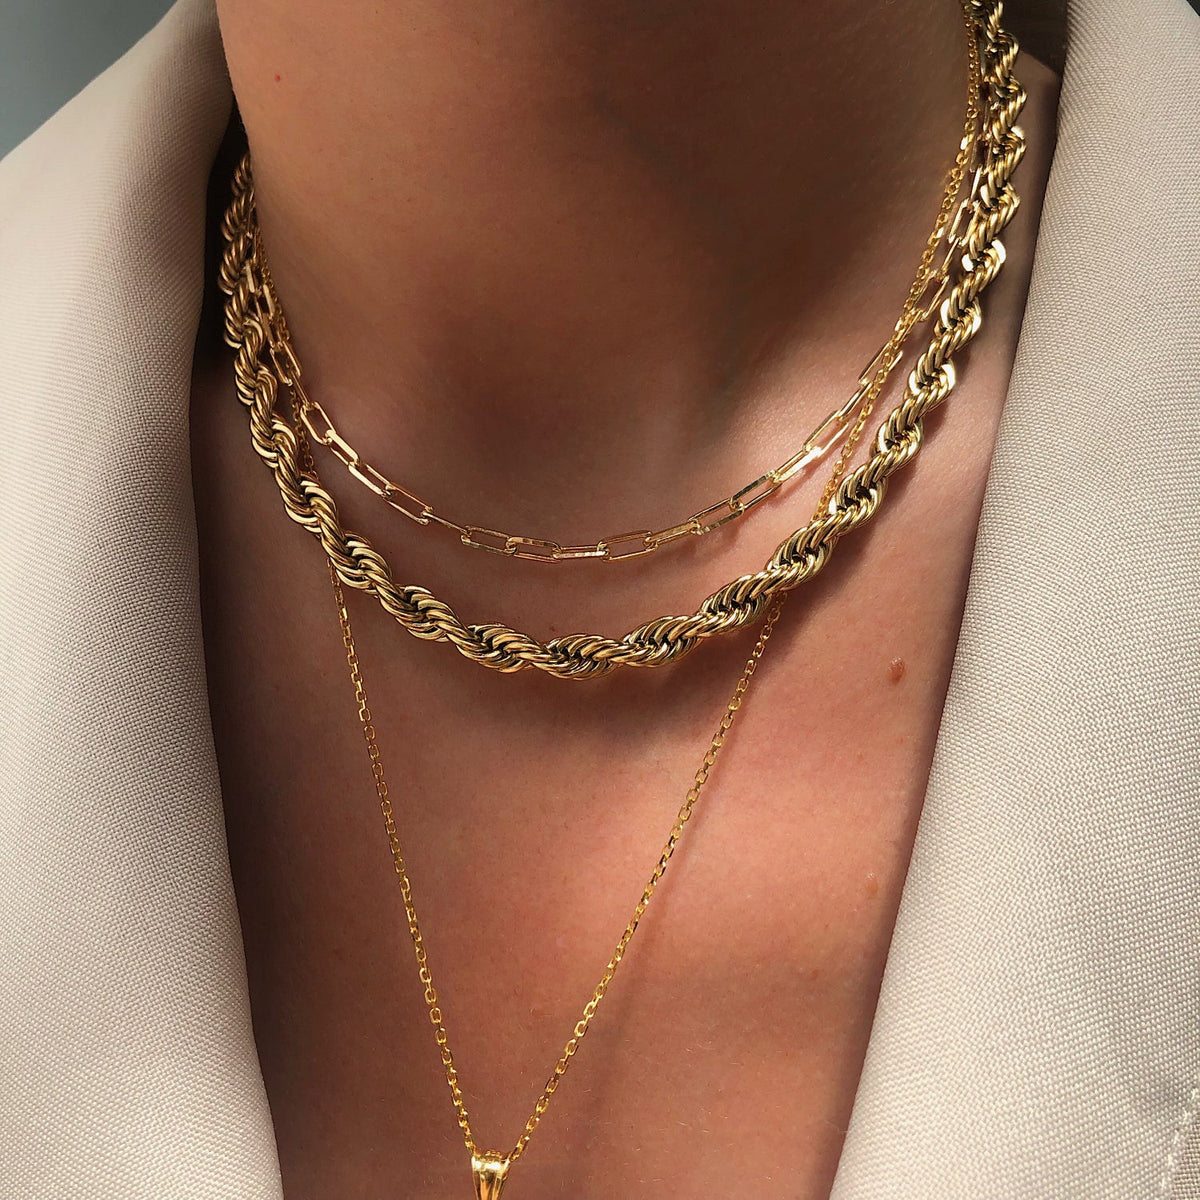 Chunky Rope Chain - Neckontheline